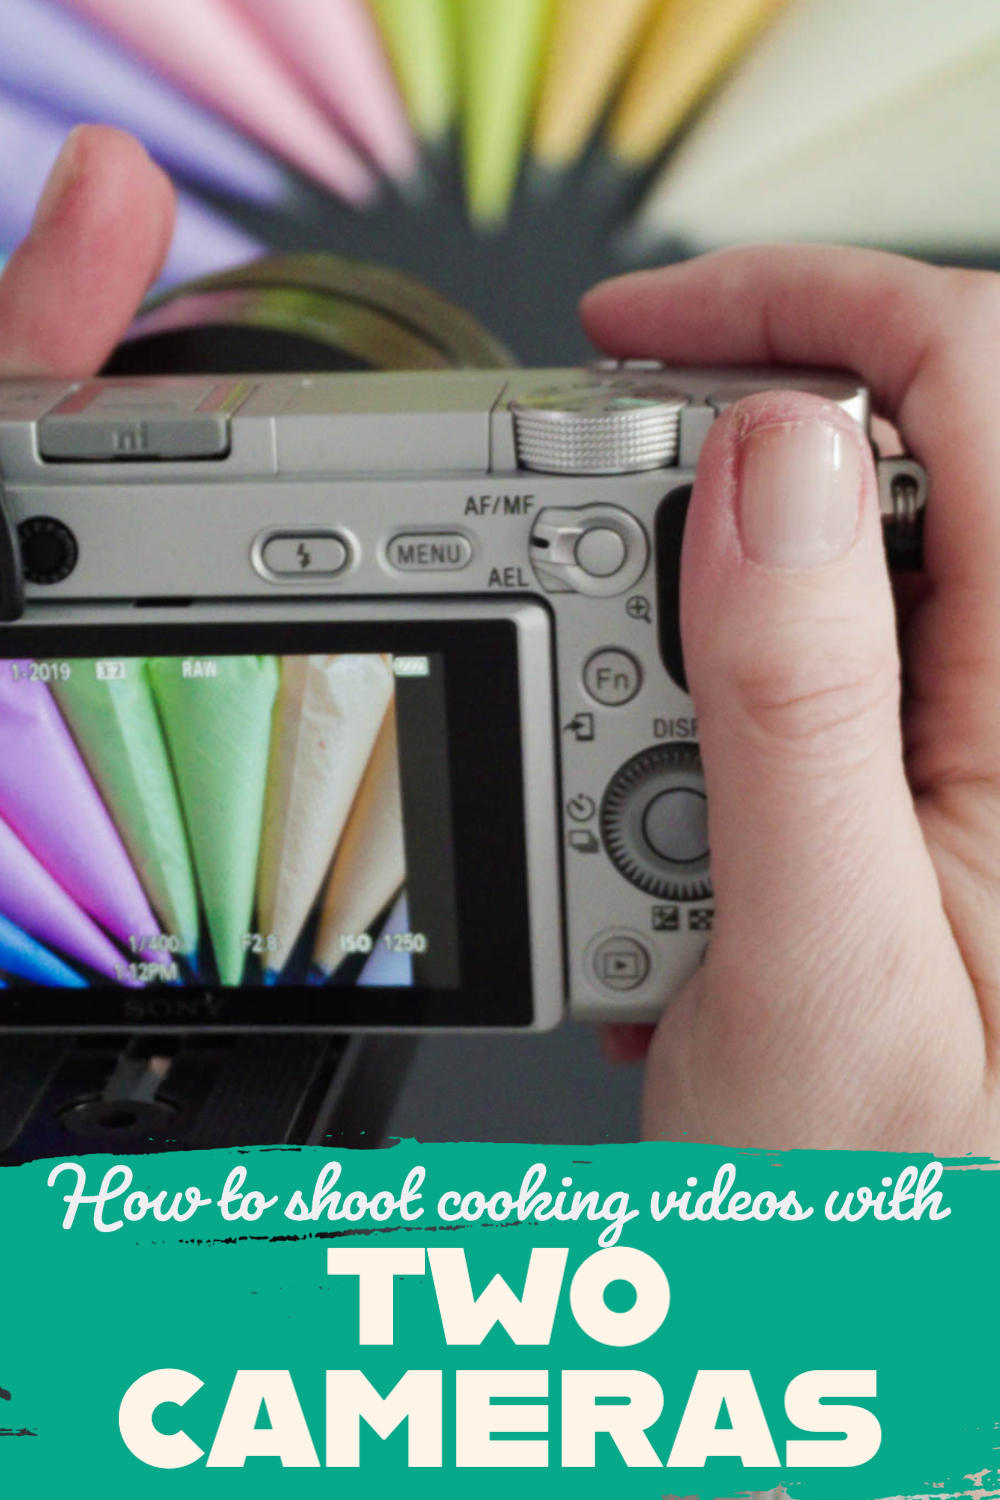 How to shoot cooking videos with two cameras